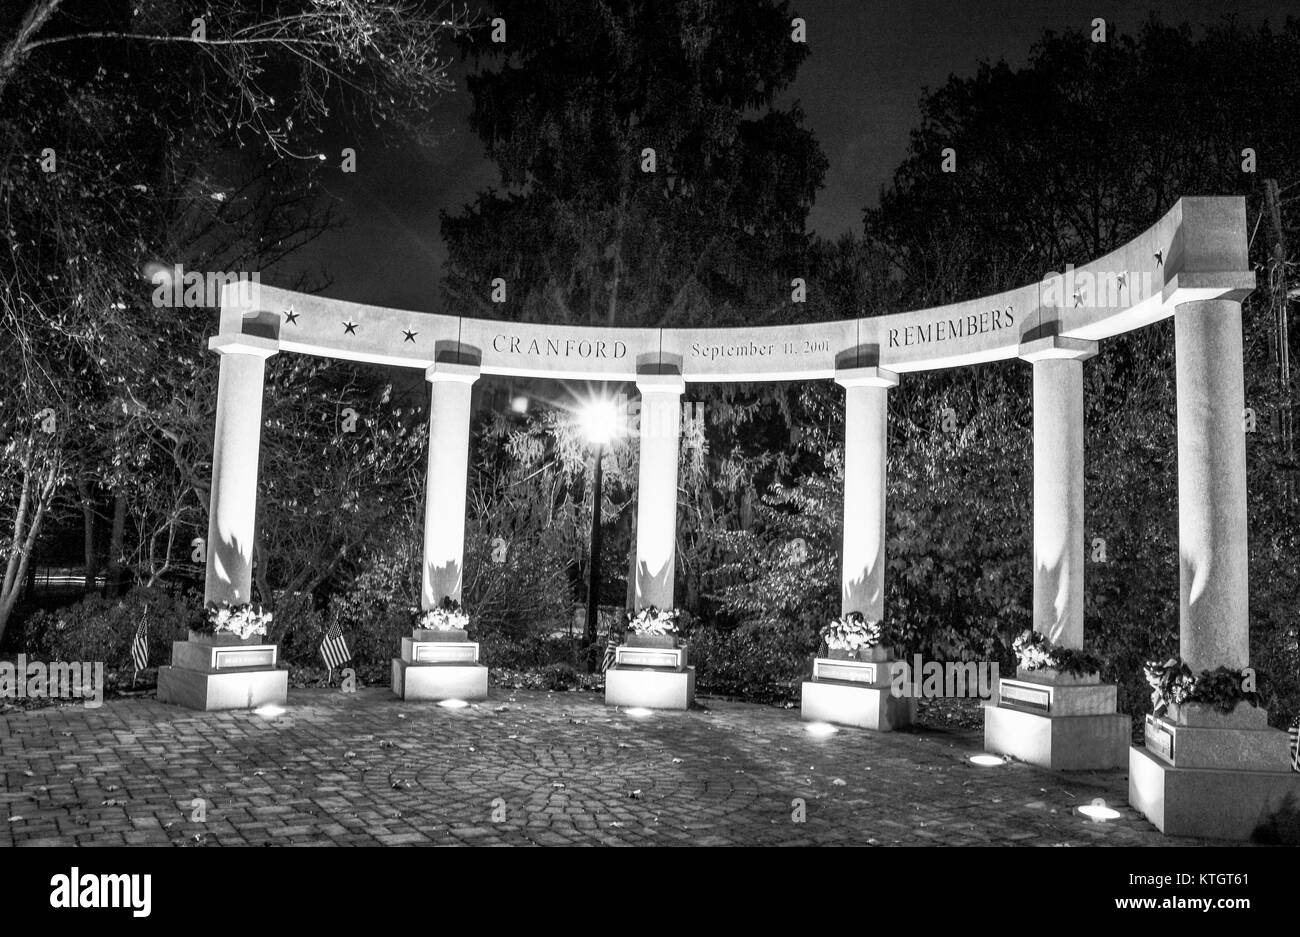 Exterior nighttime black and white stock photo of memorial commemorating September 11 attacks in Cranford New Jersey in Union County Stock Photo